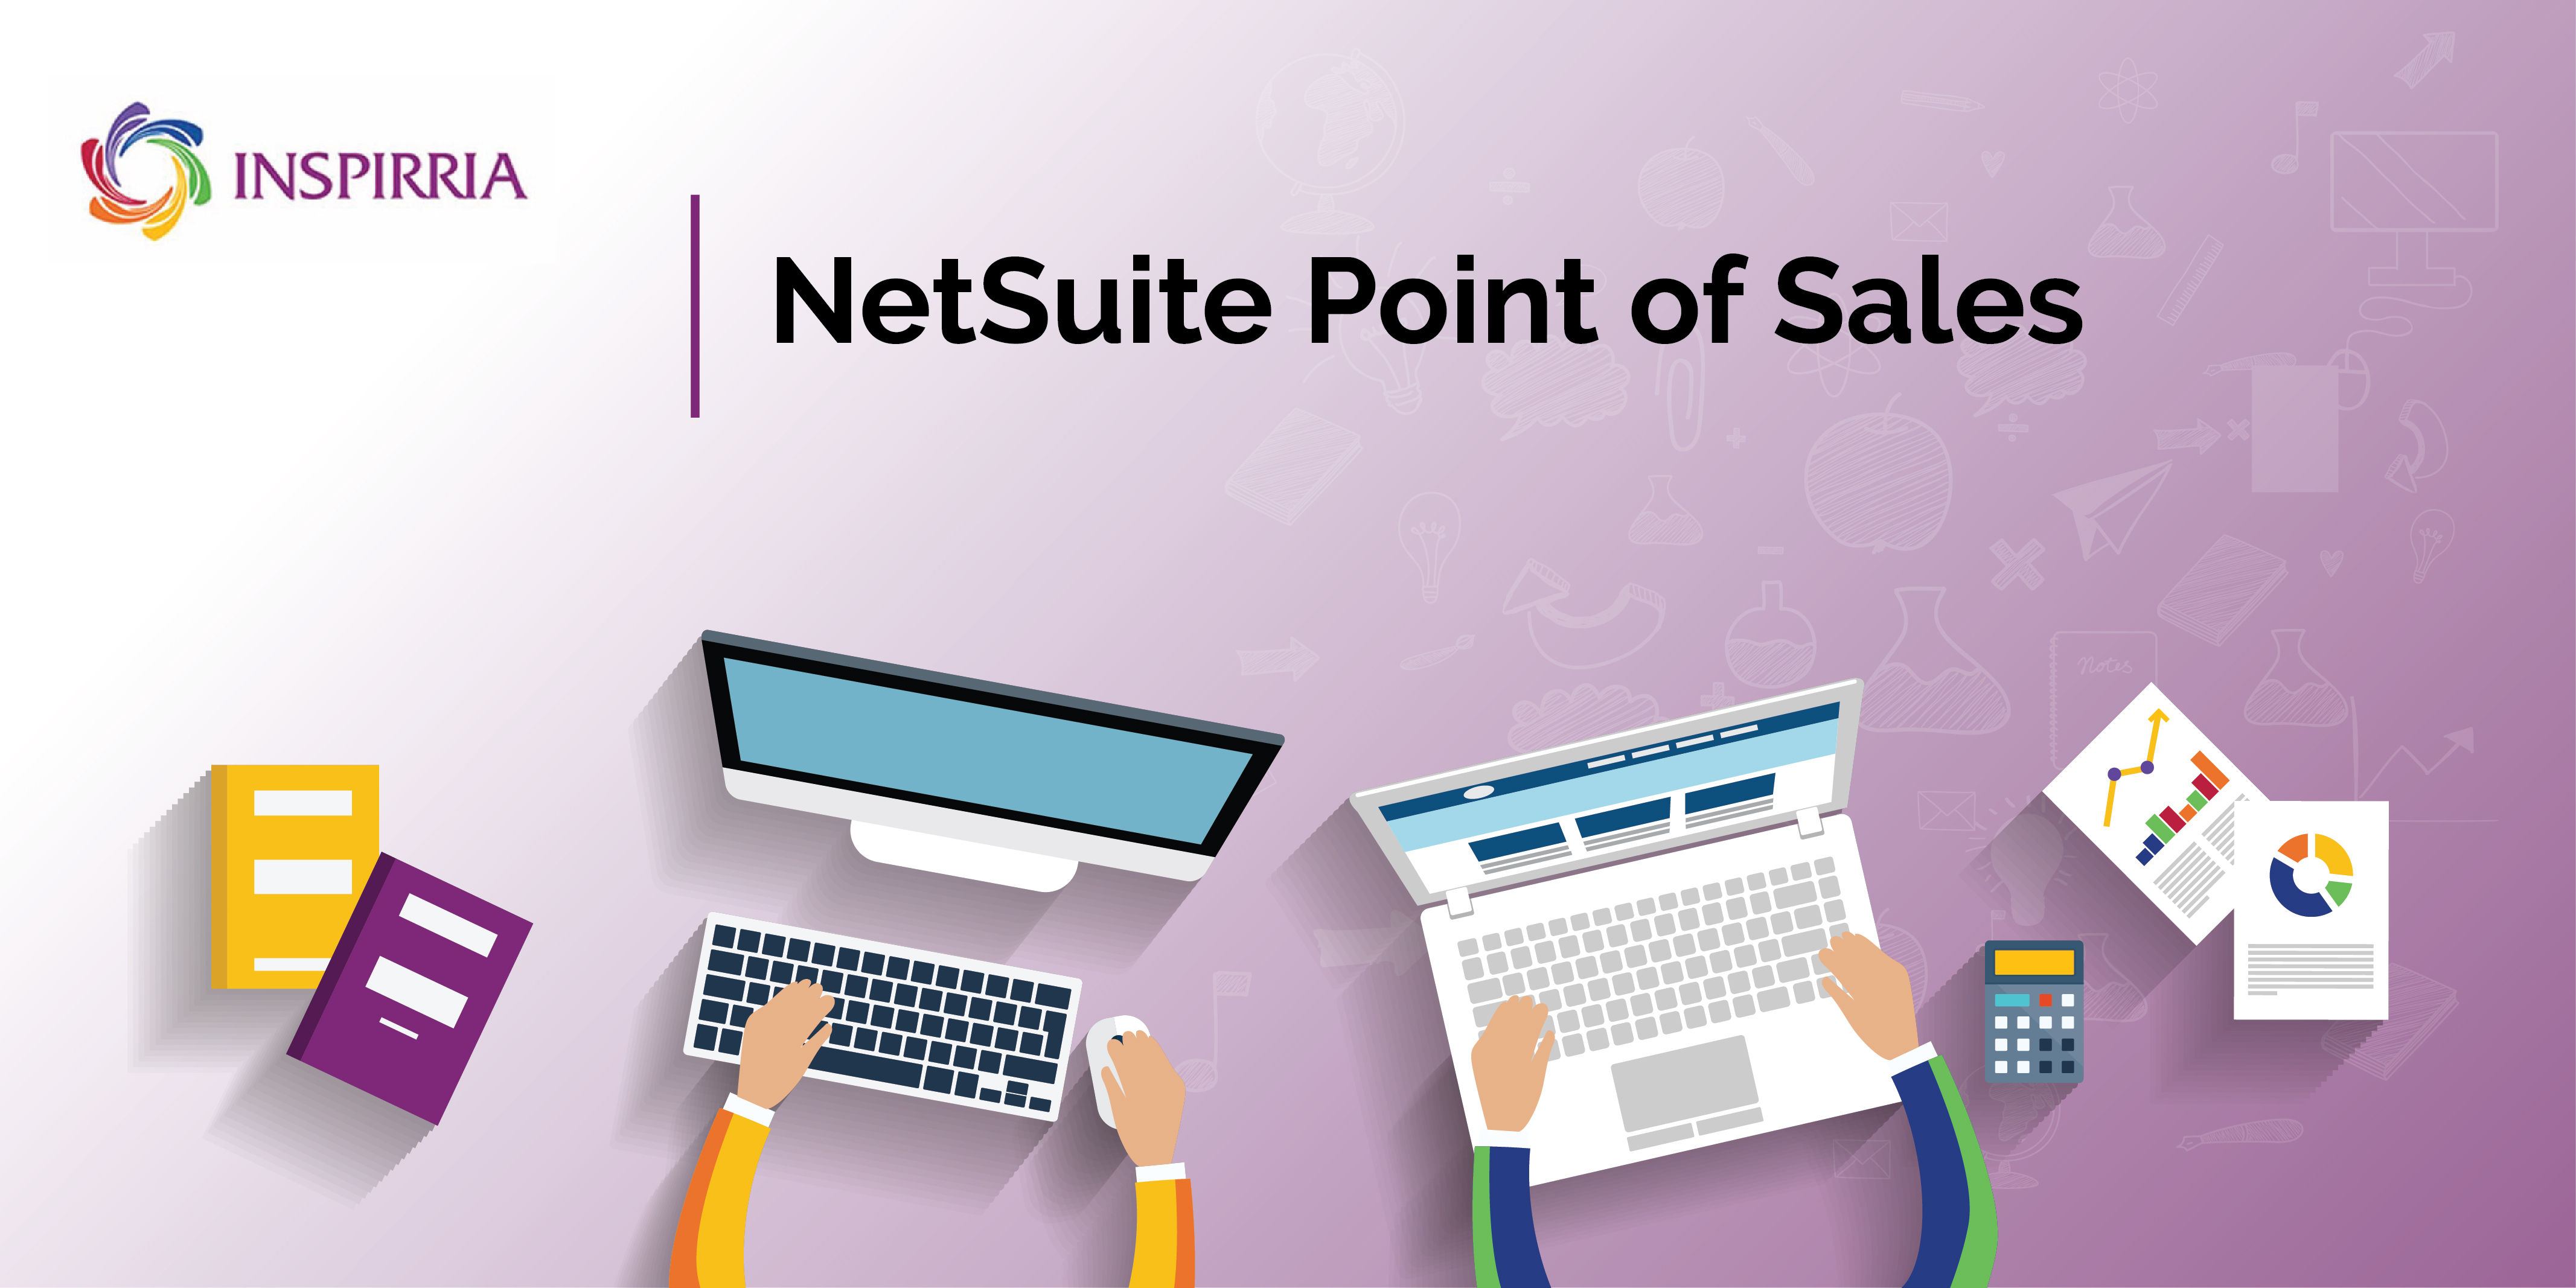 NetSuite Point of Sales